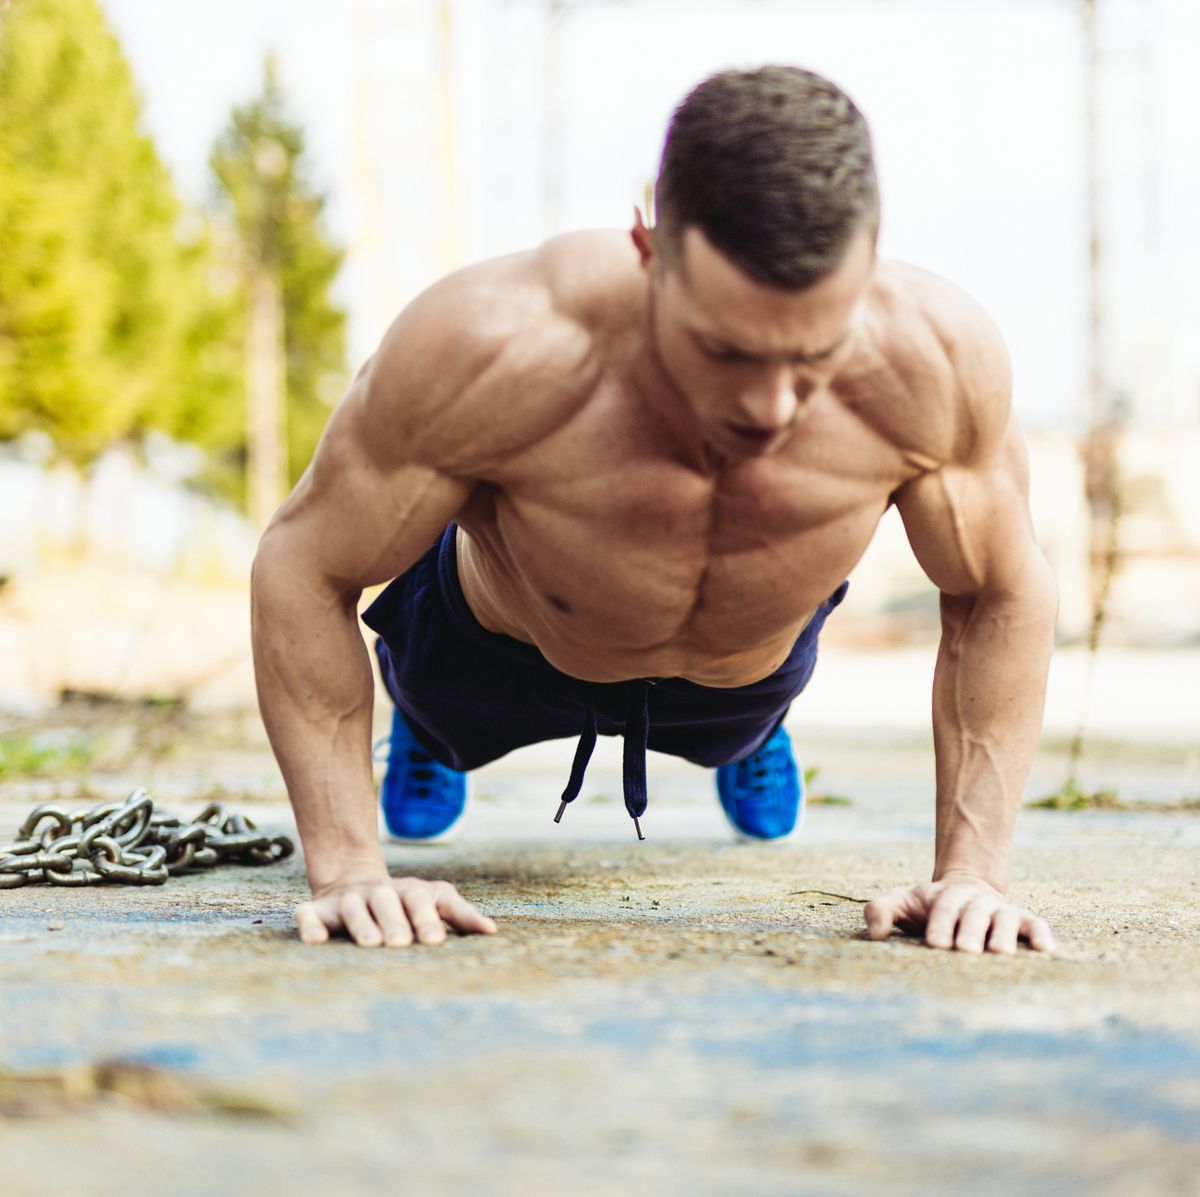 Best Pushup Workout, Push Up Workout